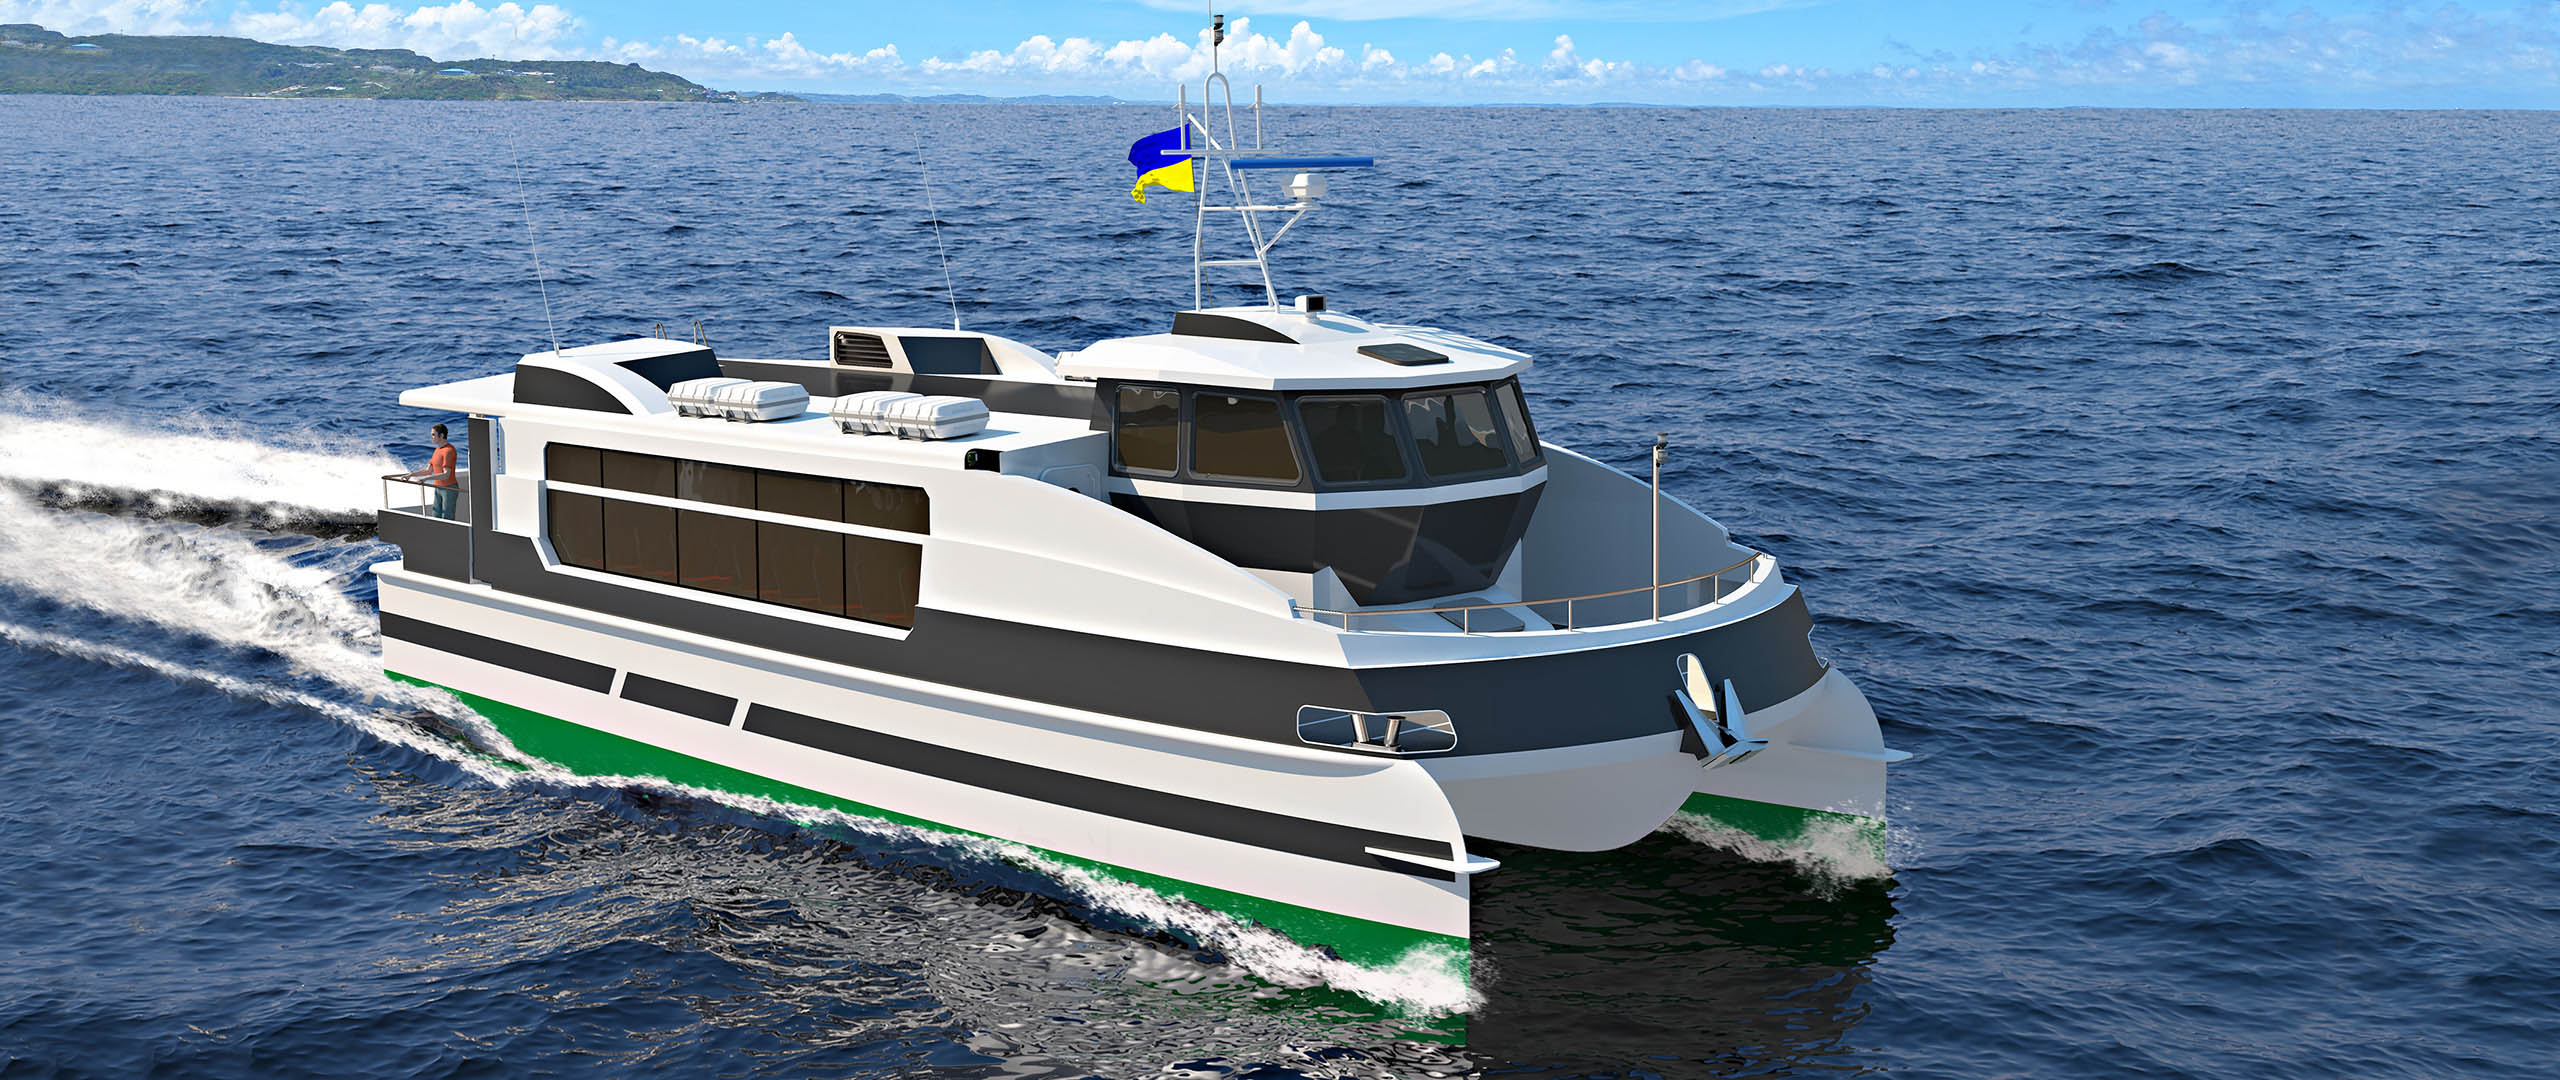 Project CatLine19